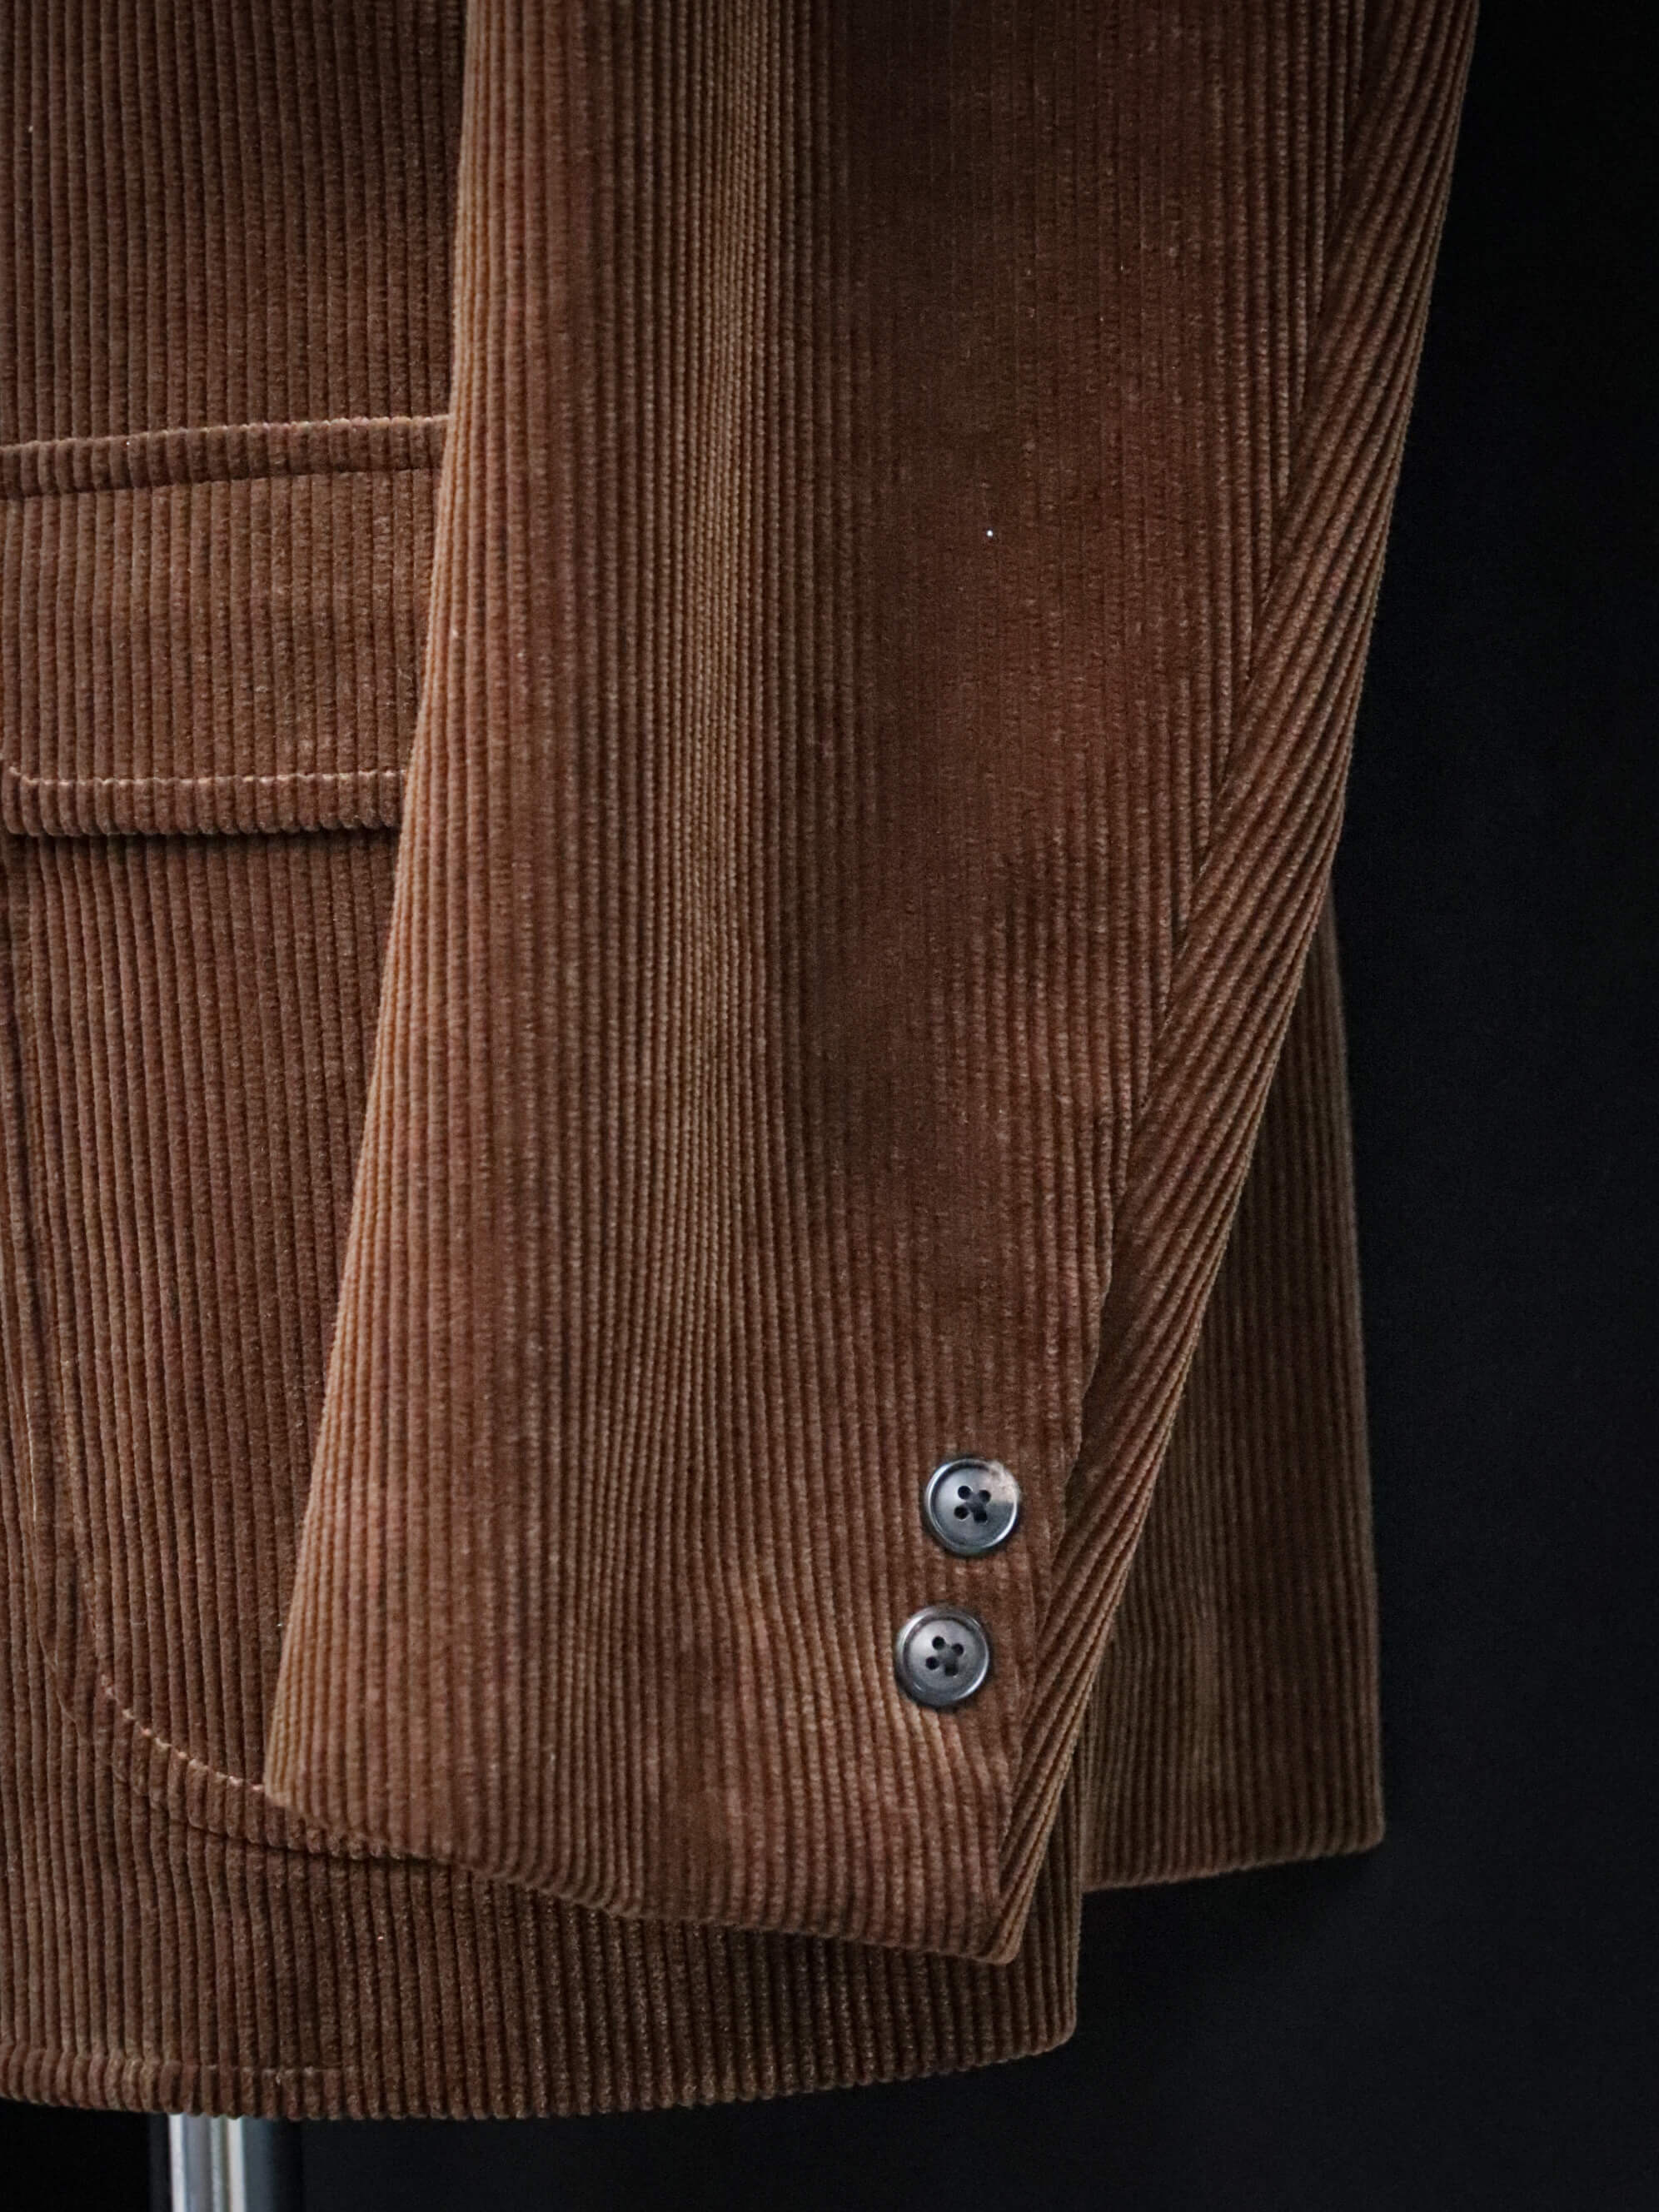 Tailored Jacket 8 Wale Corduroy Brown